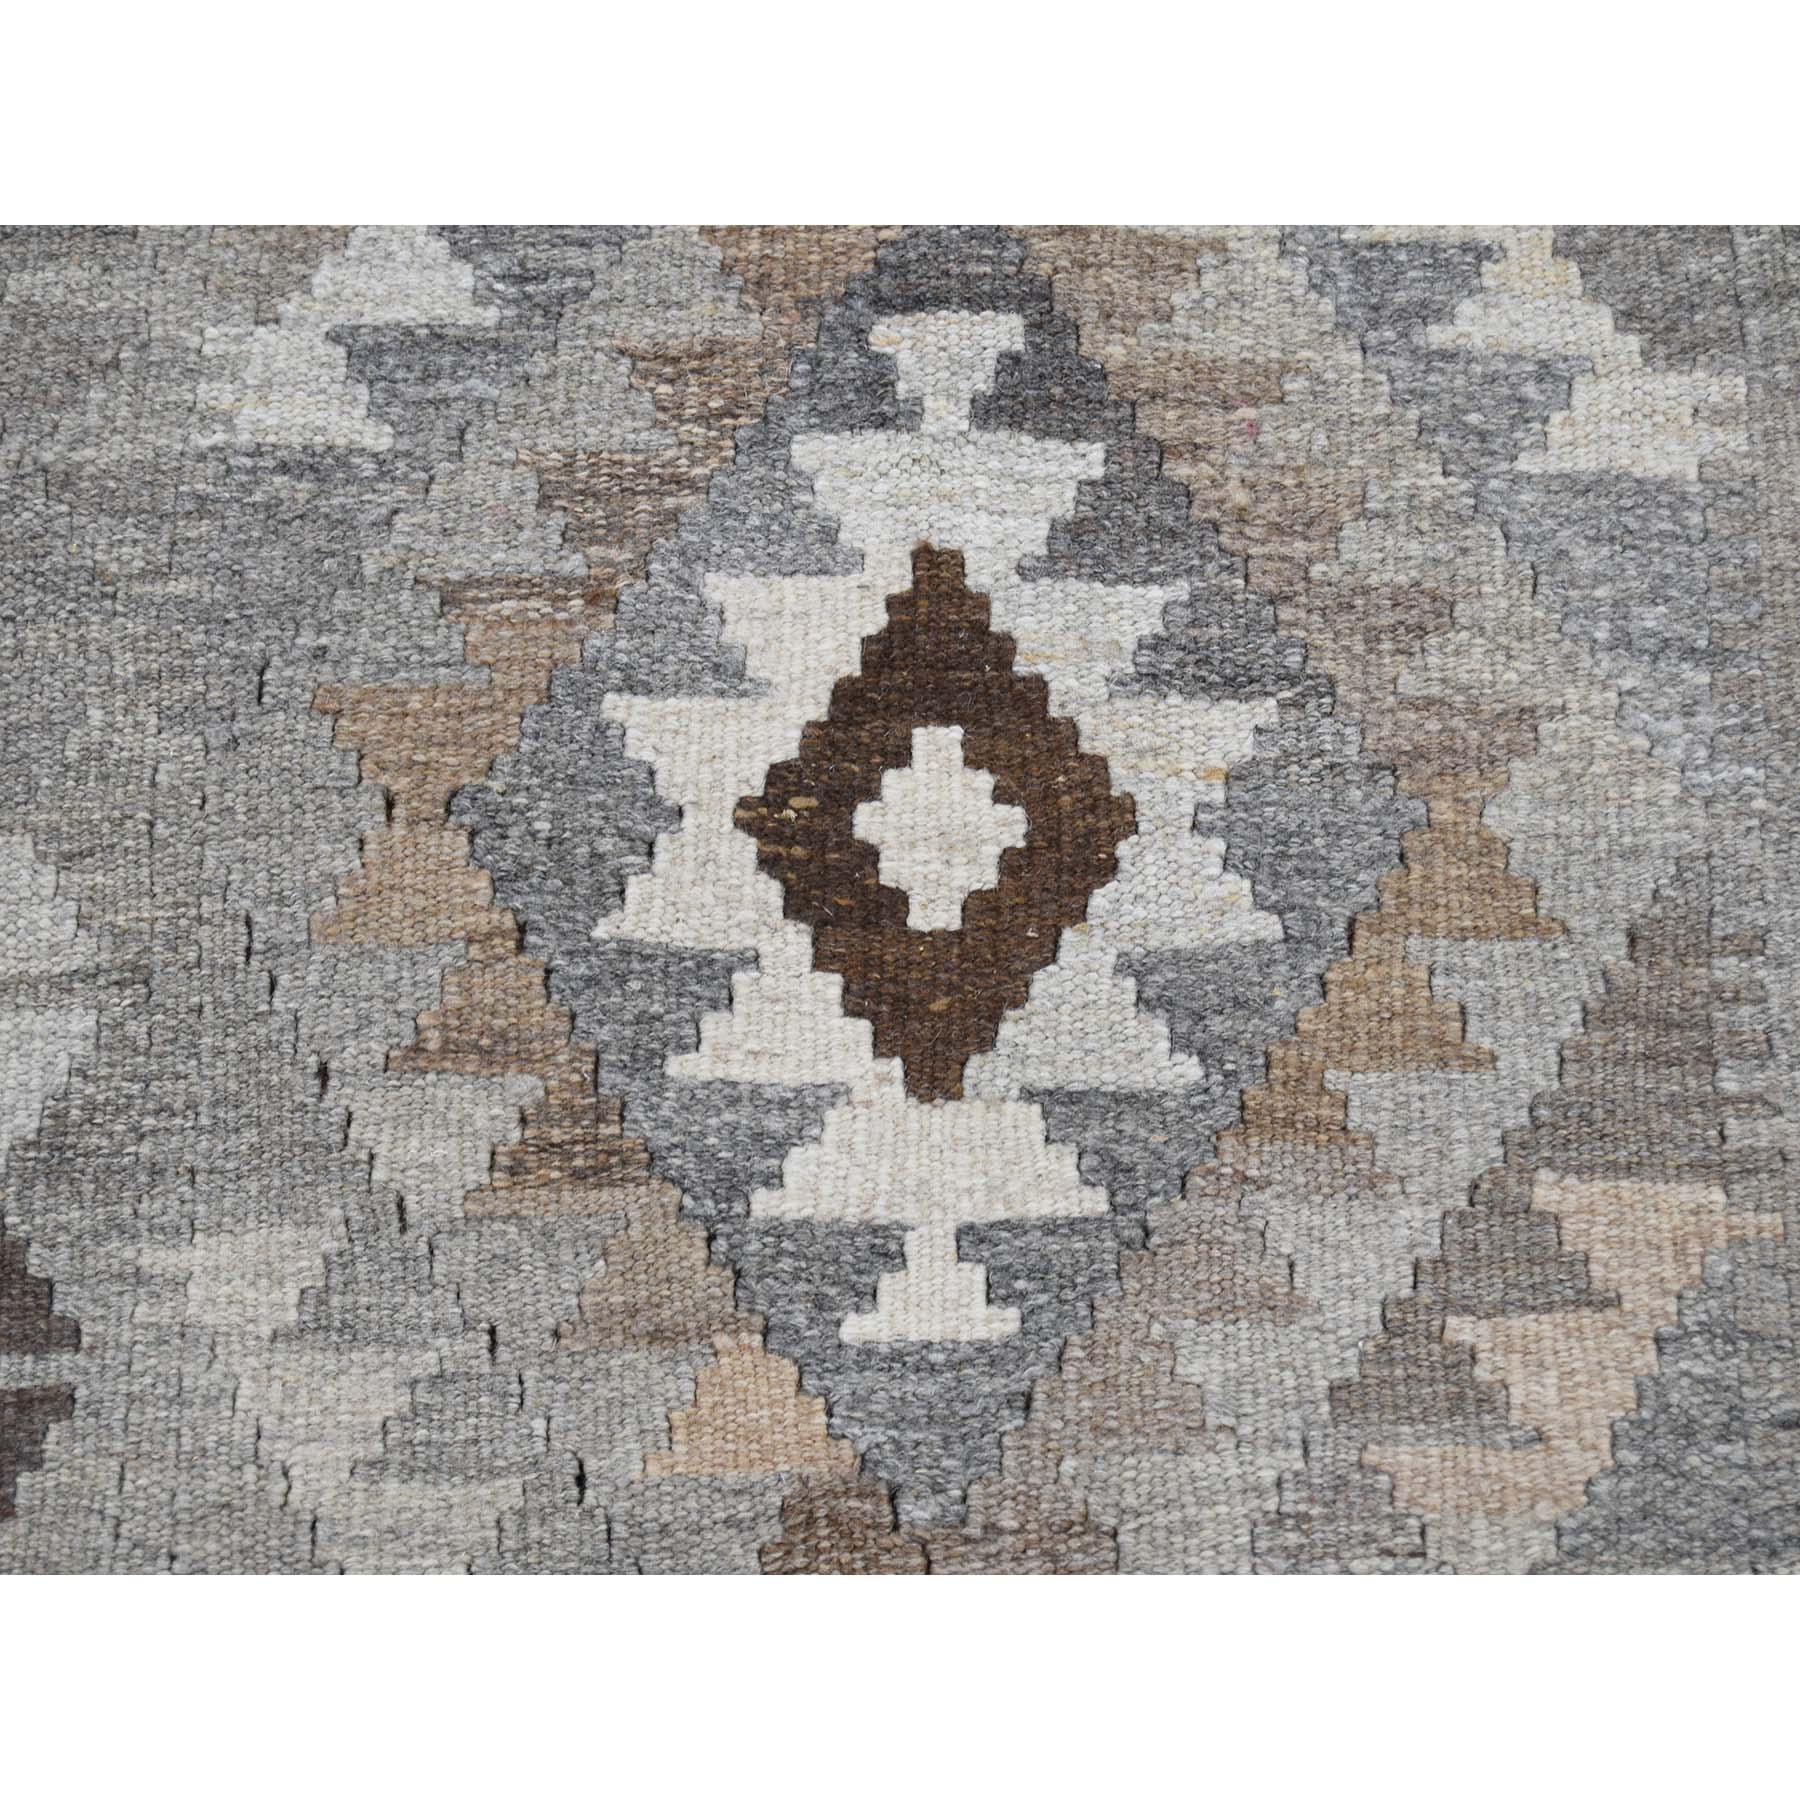 2-7 x3-10  Afghan Kilim Reversible Undyed Natural Wool Hand Woven Oriental Rug 